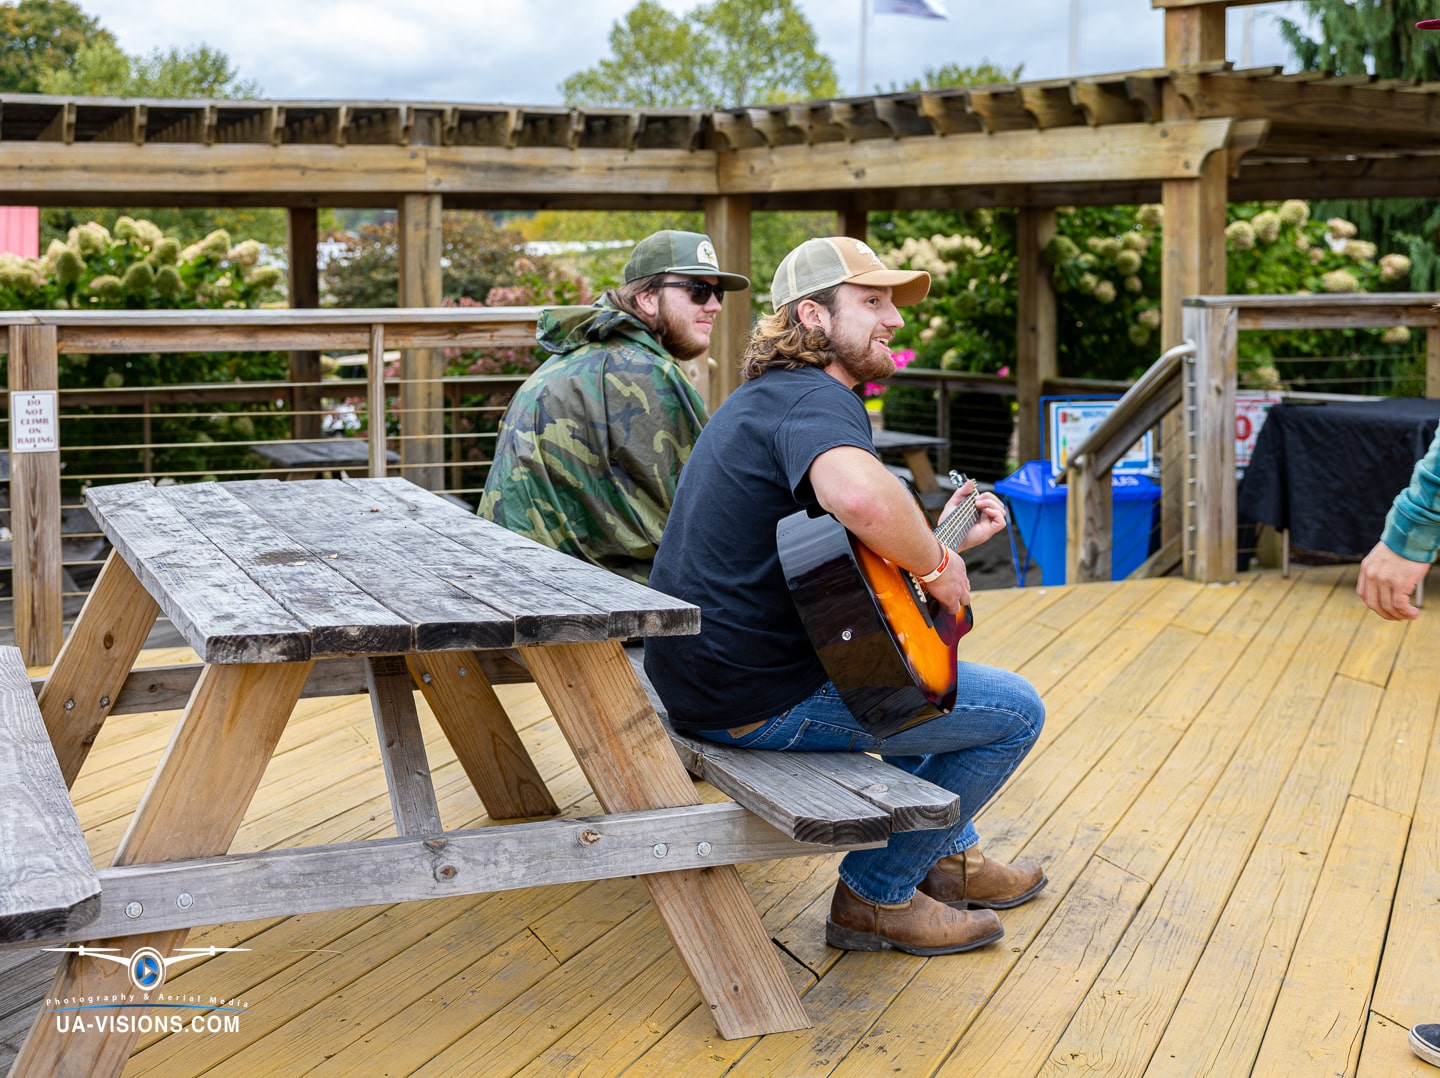 A candid moment of music and musings on the deck at Healing Appalachia.